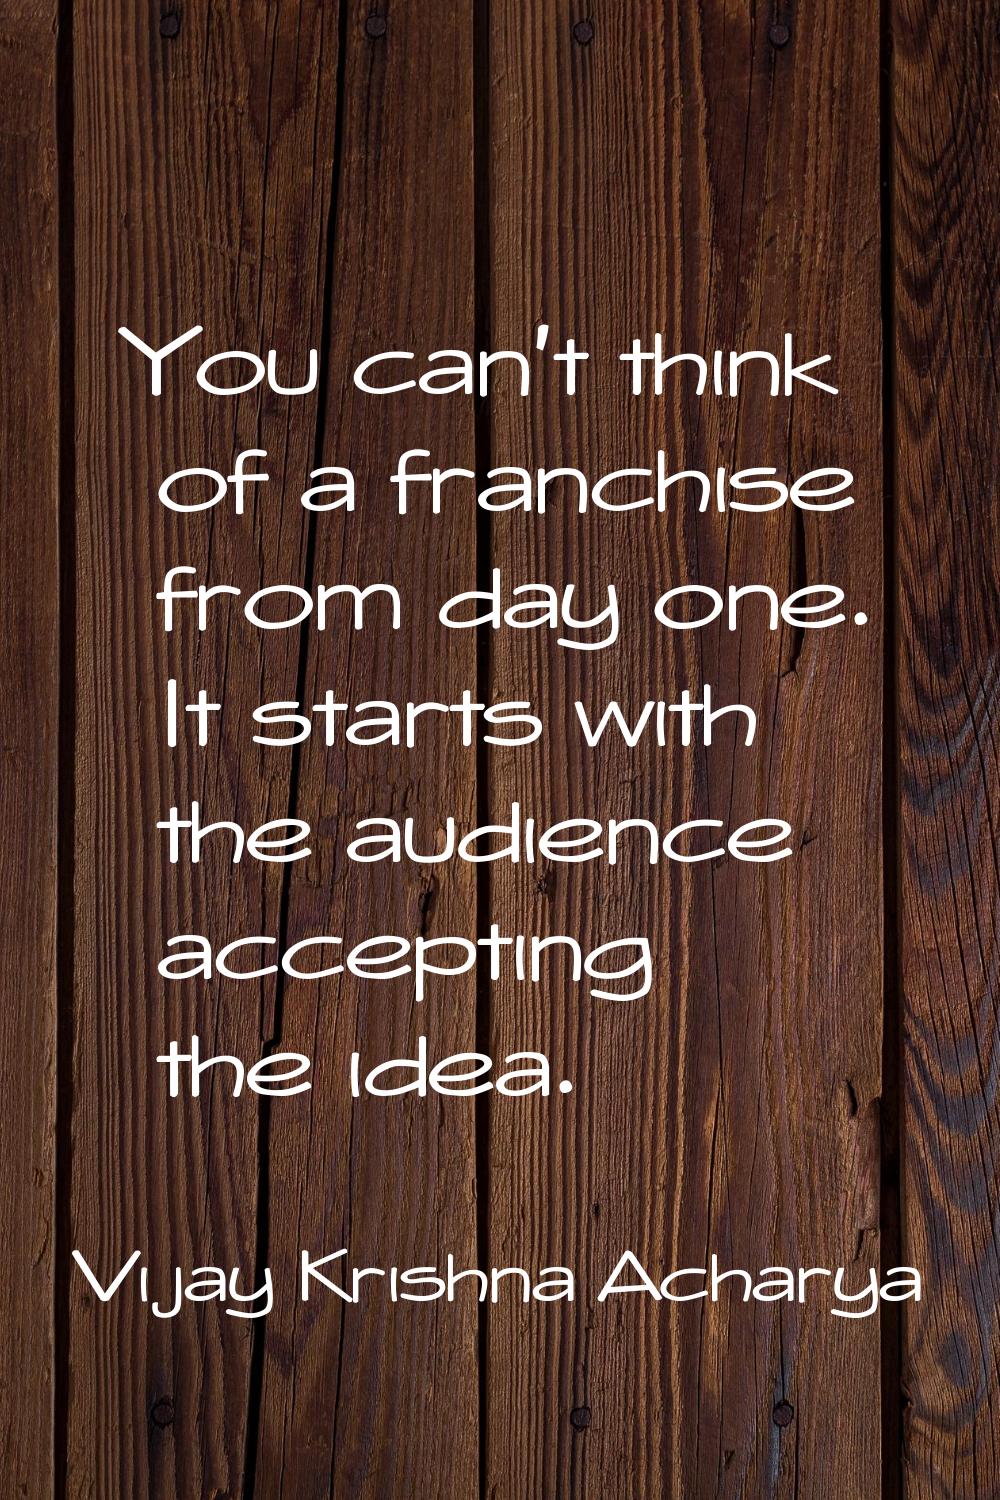 You can't think of a franchise from day one. It starts with the audience accepting the idea.